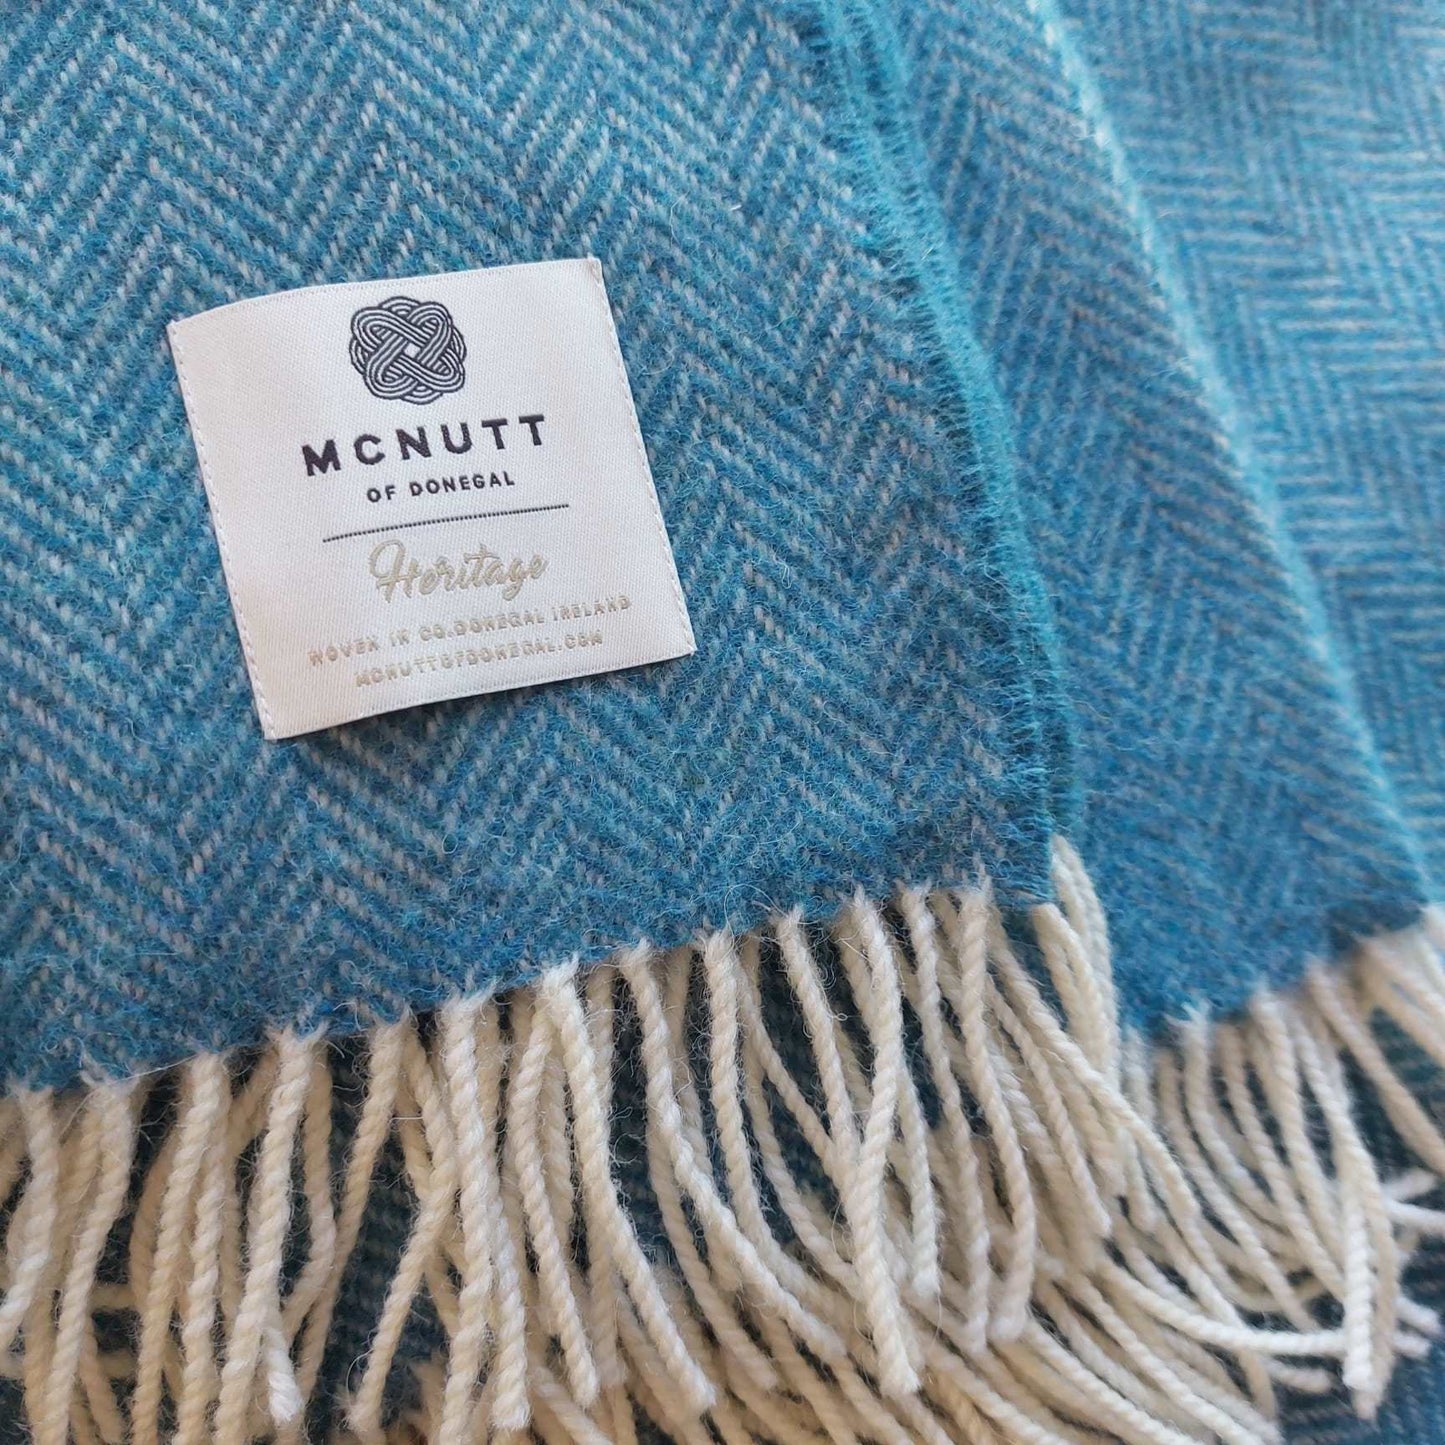 McNutt Blanket 100% Pure Wool Throw - Heritage Collection - Blue Sky Herringbone - McNutts of Donegal